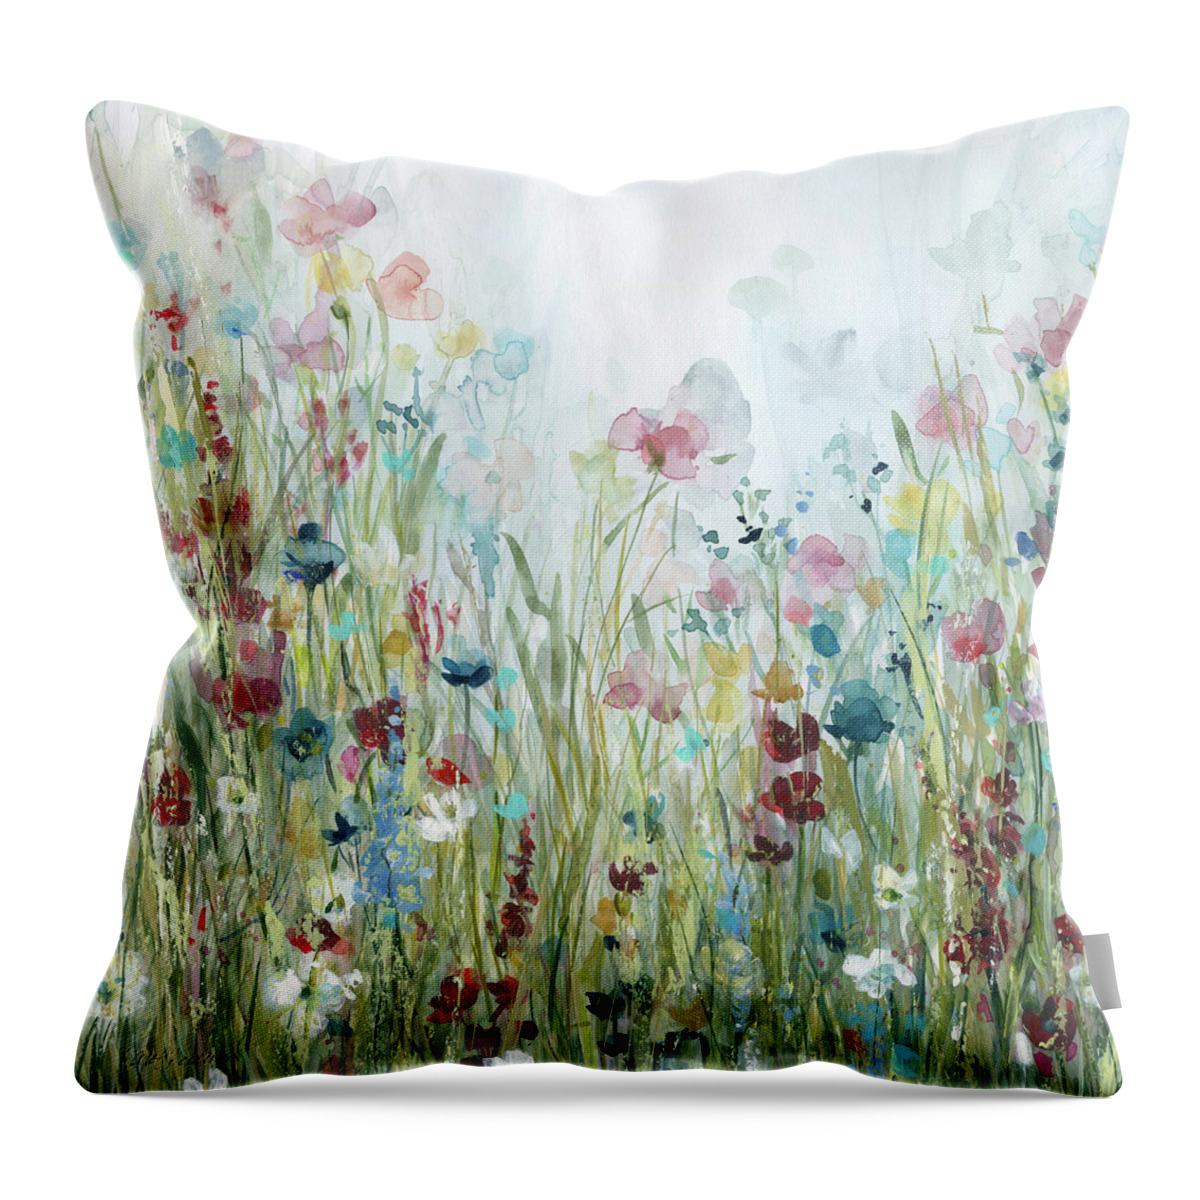 Soft Blue Pink Cranberry Yellow Teal Wildflower Meadow Contemporary Mixed Media Watercolor Vivid Floral Throw Pillow featuring the painting Wild Meadow by Carol Robinson